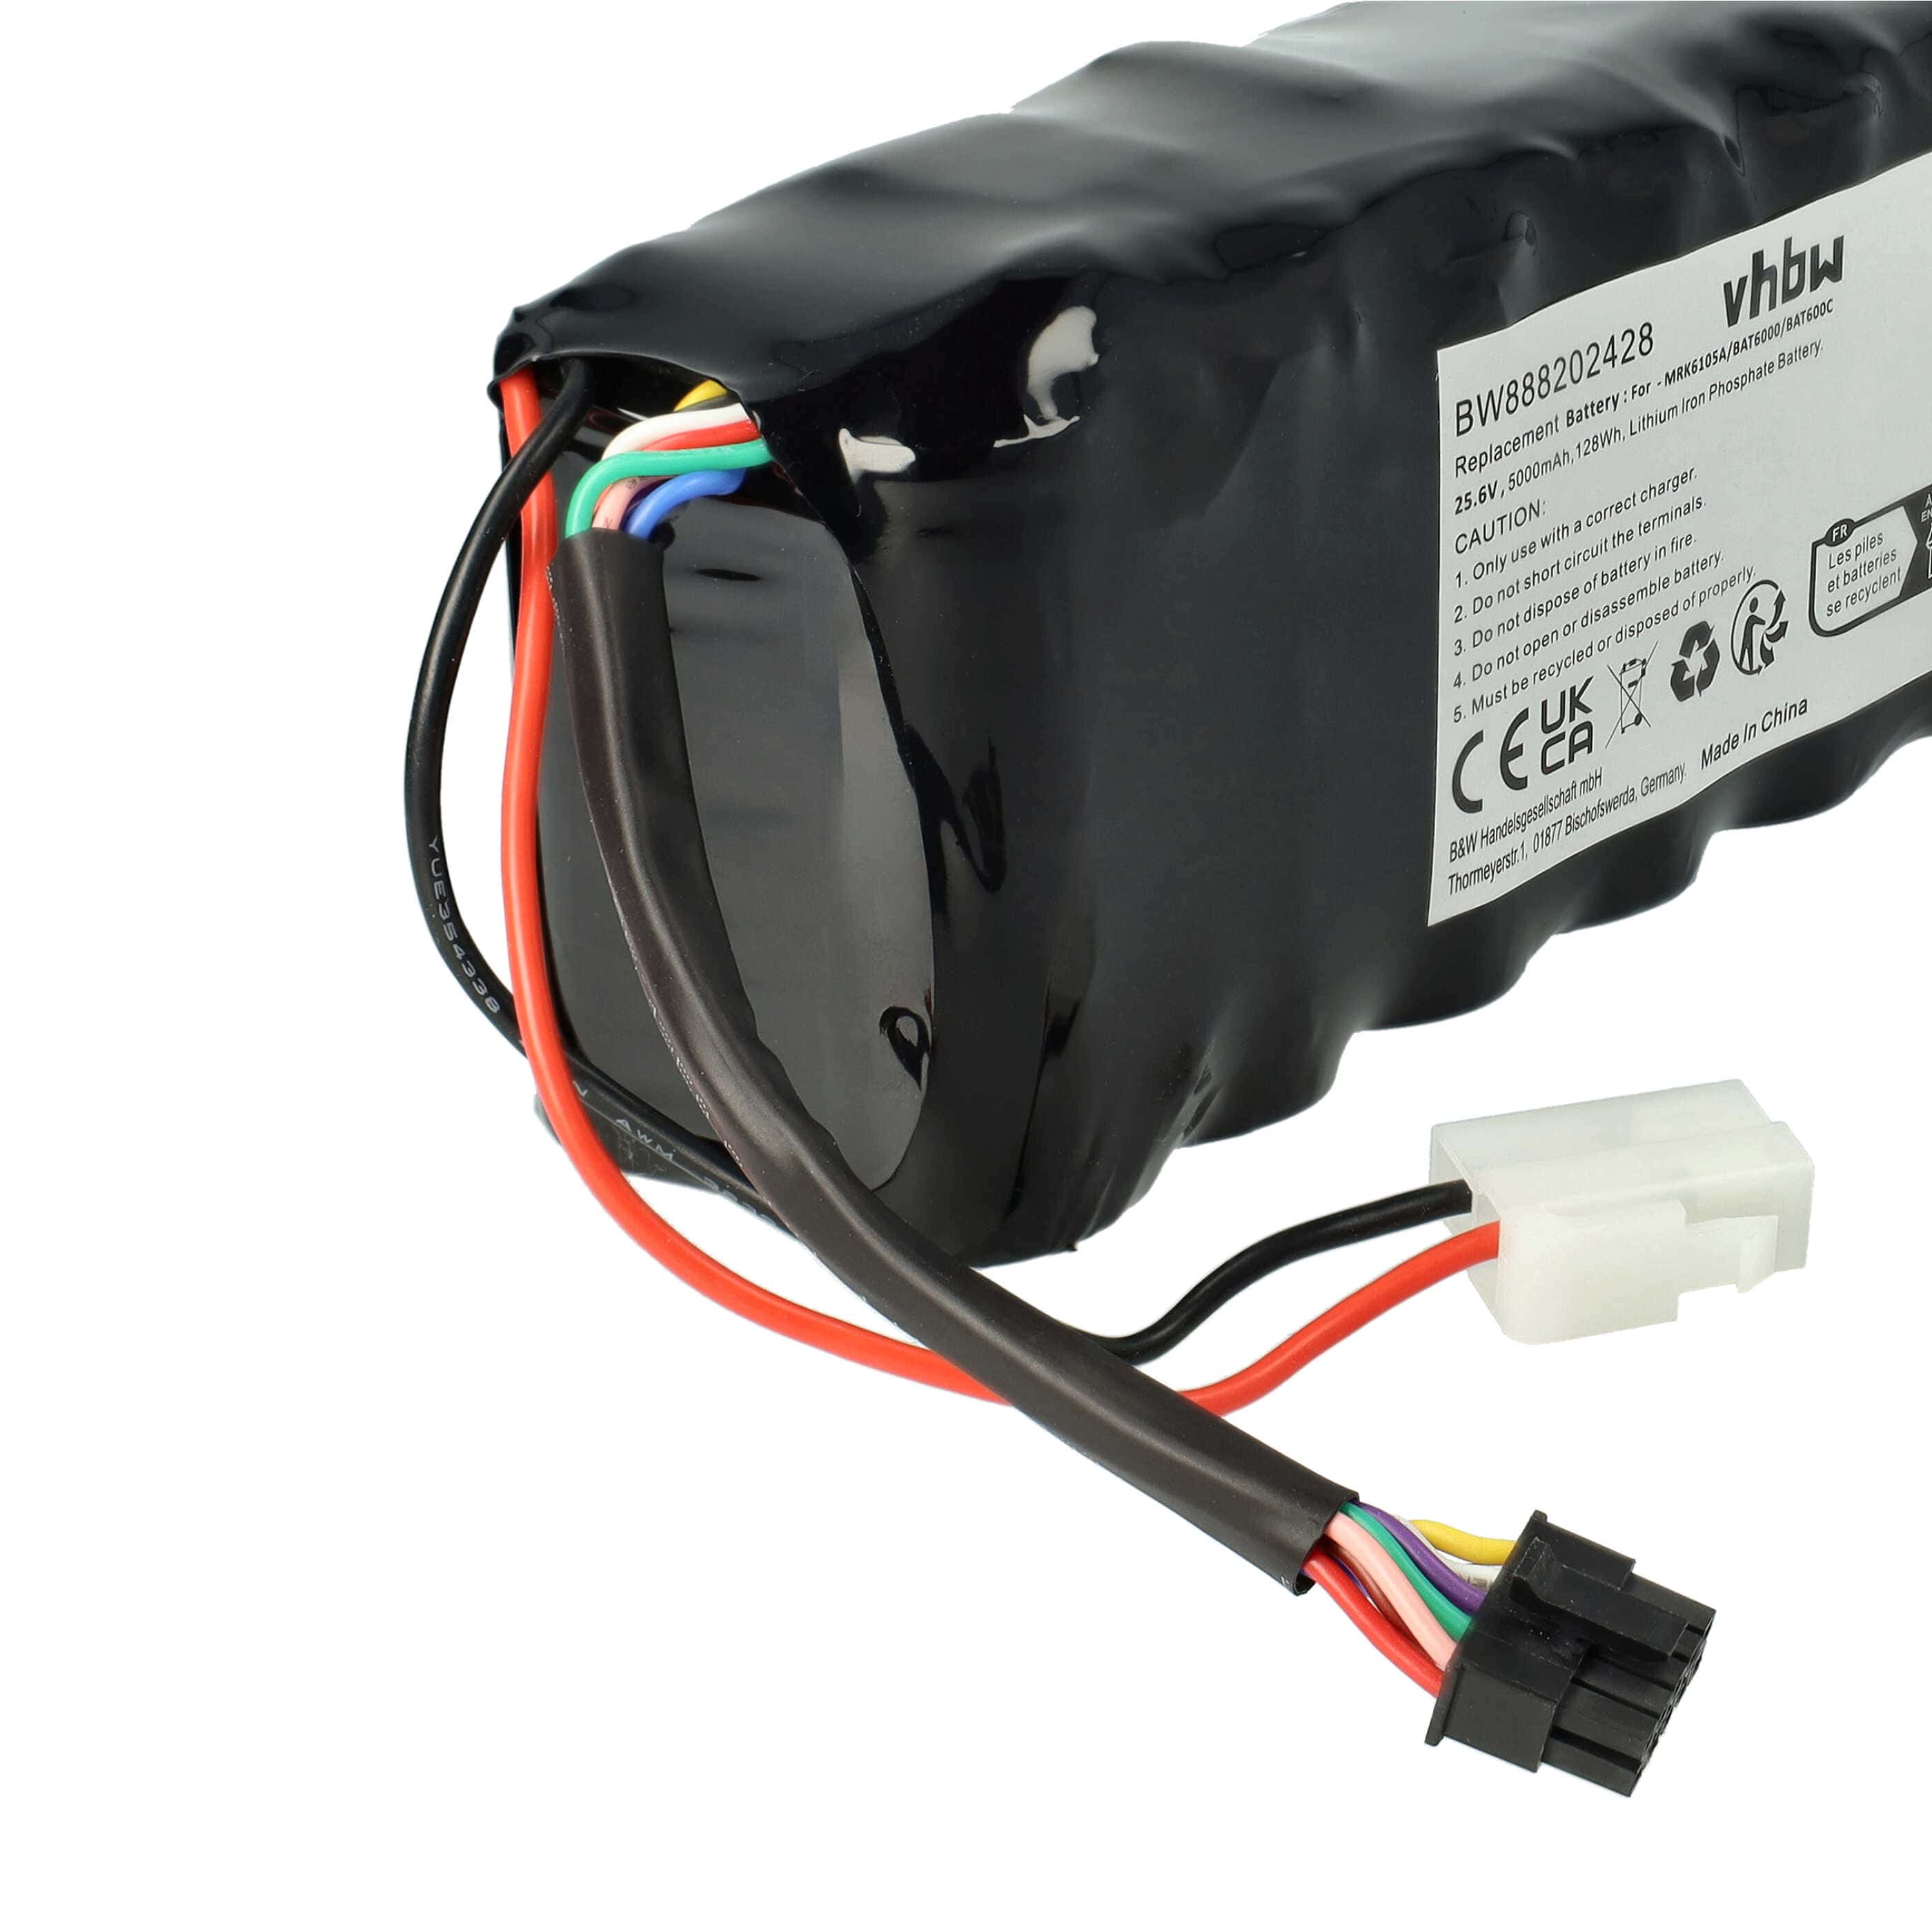 Lawnmower Battery Replacement for Robomow MRK6105A - 5000mAh 25.6V LiFePO4, black